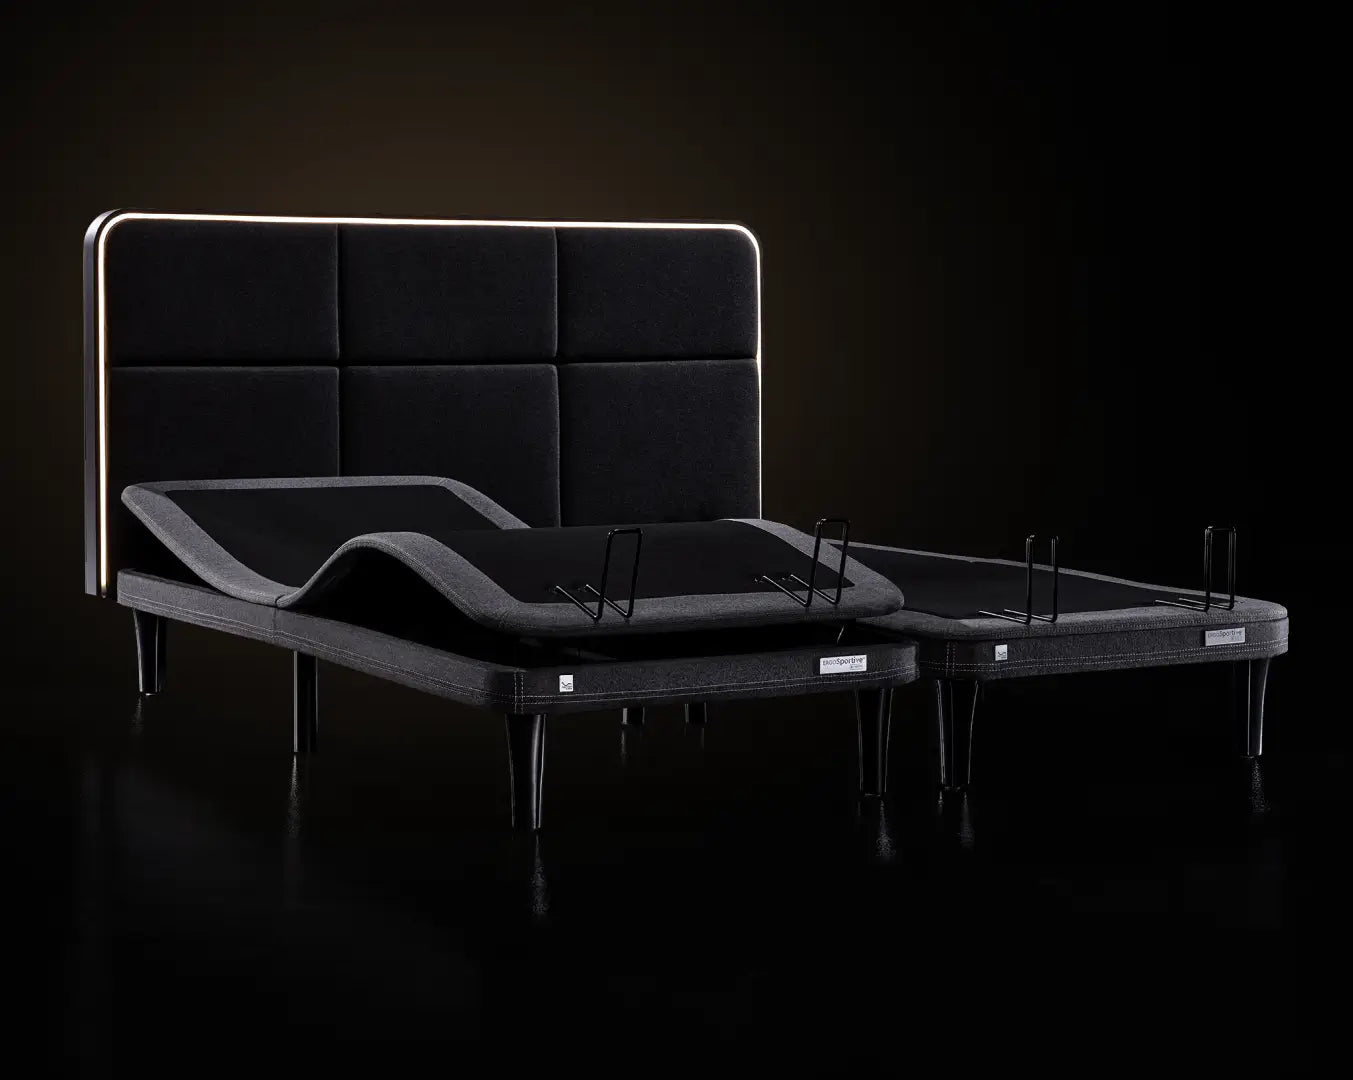 An ErgoSportive bed, engineered for peak performance and restorative sleep. With cutting-edge smart sleep tracking technology, this bed monitors your sleep patterns and provides personalized insights for optimal rest. Its automatic anti-snore system ensures uninterrupted sleep, promoting deeper, more rejuvenating rest.